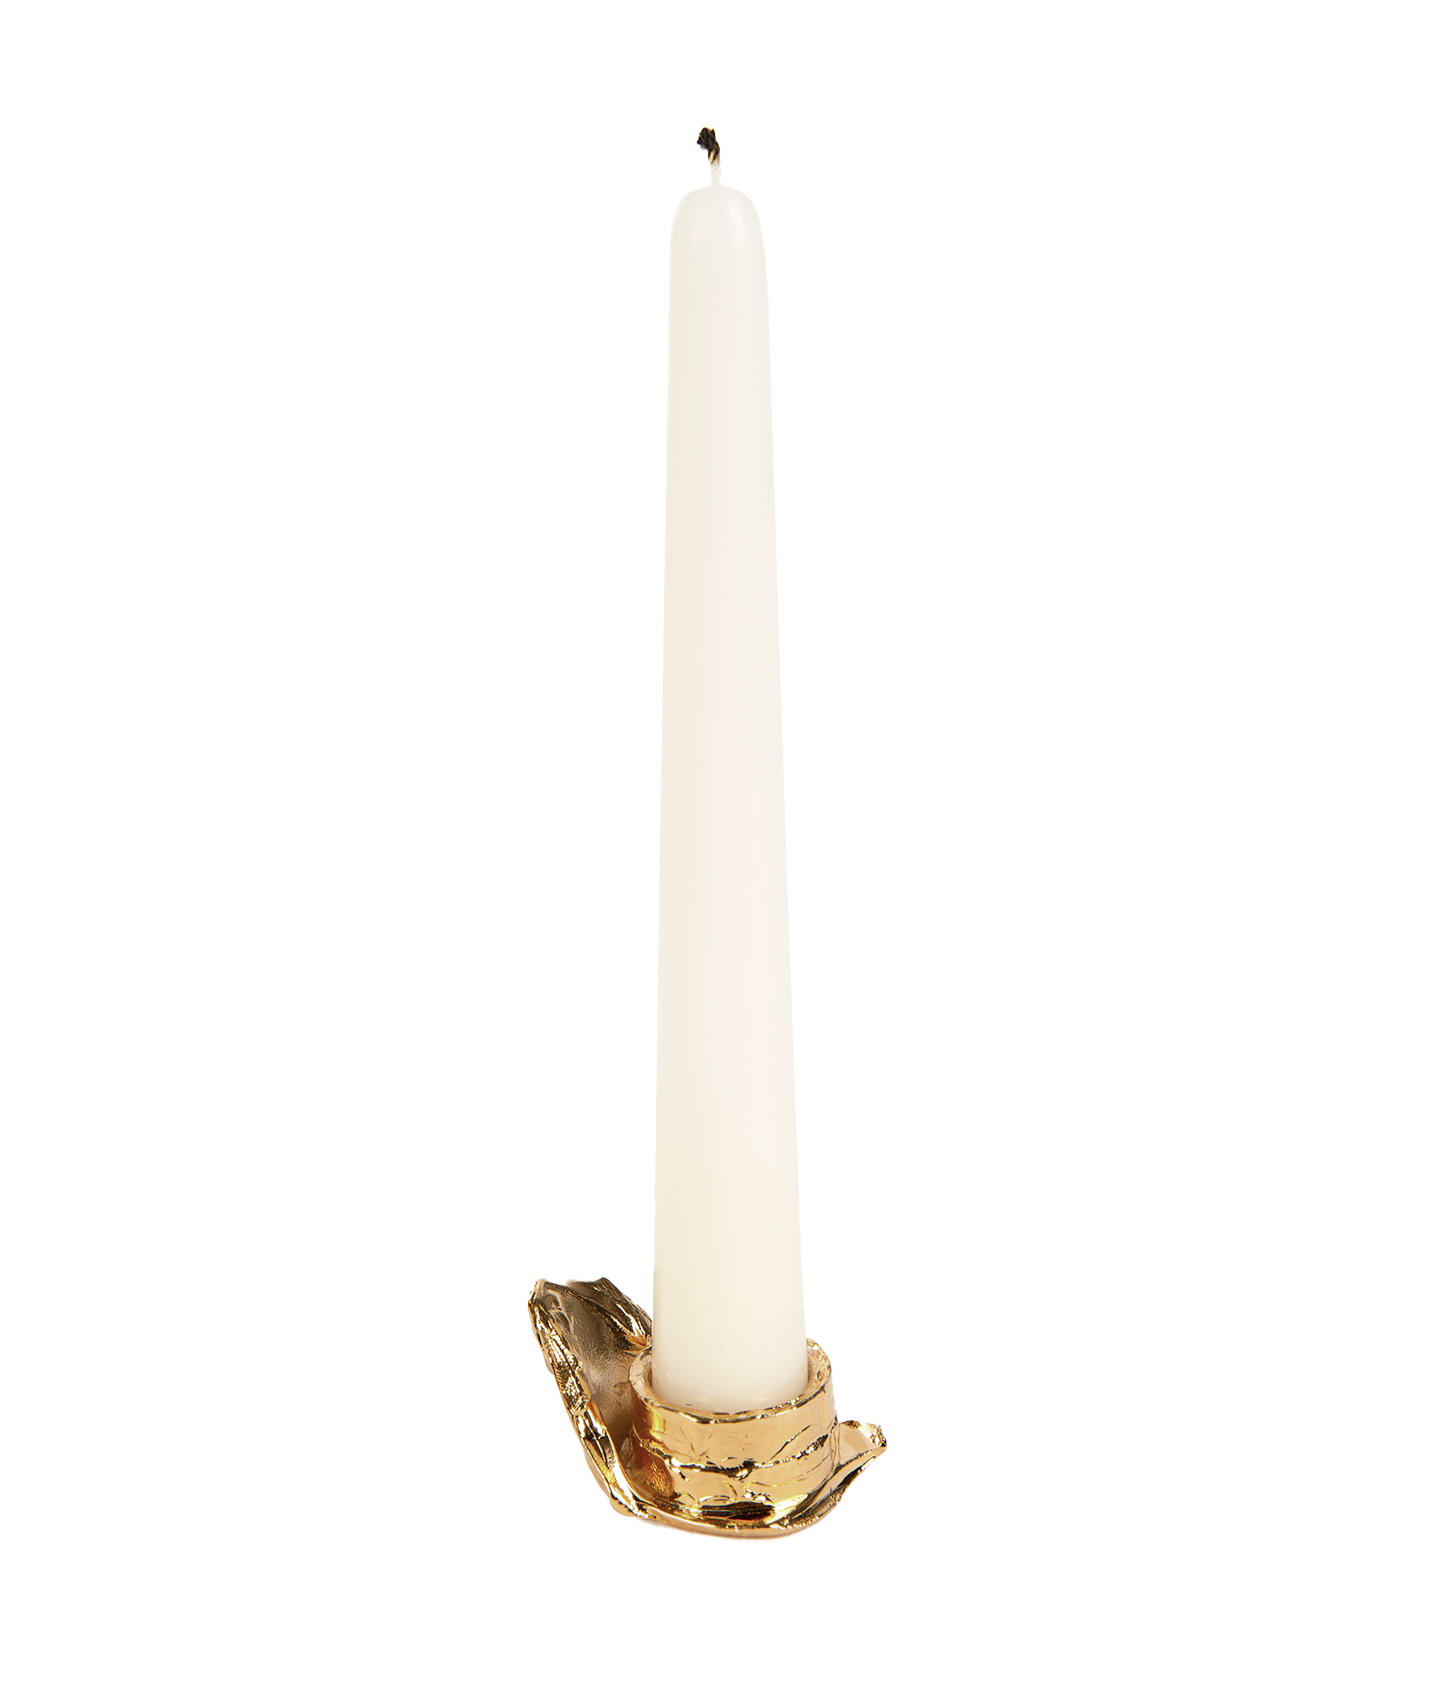 The Mountains Cliff Candlestick Holder